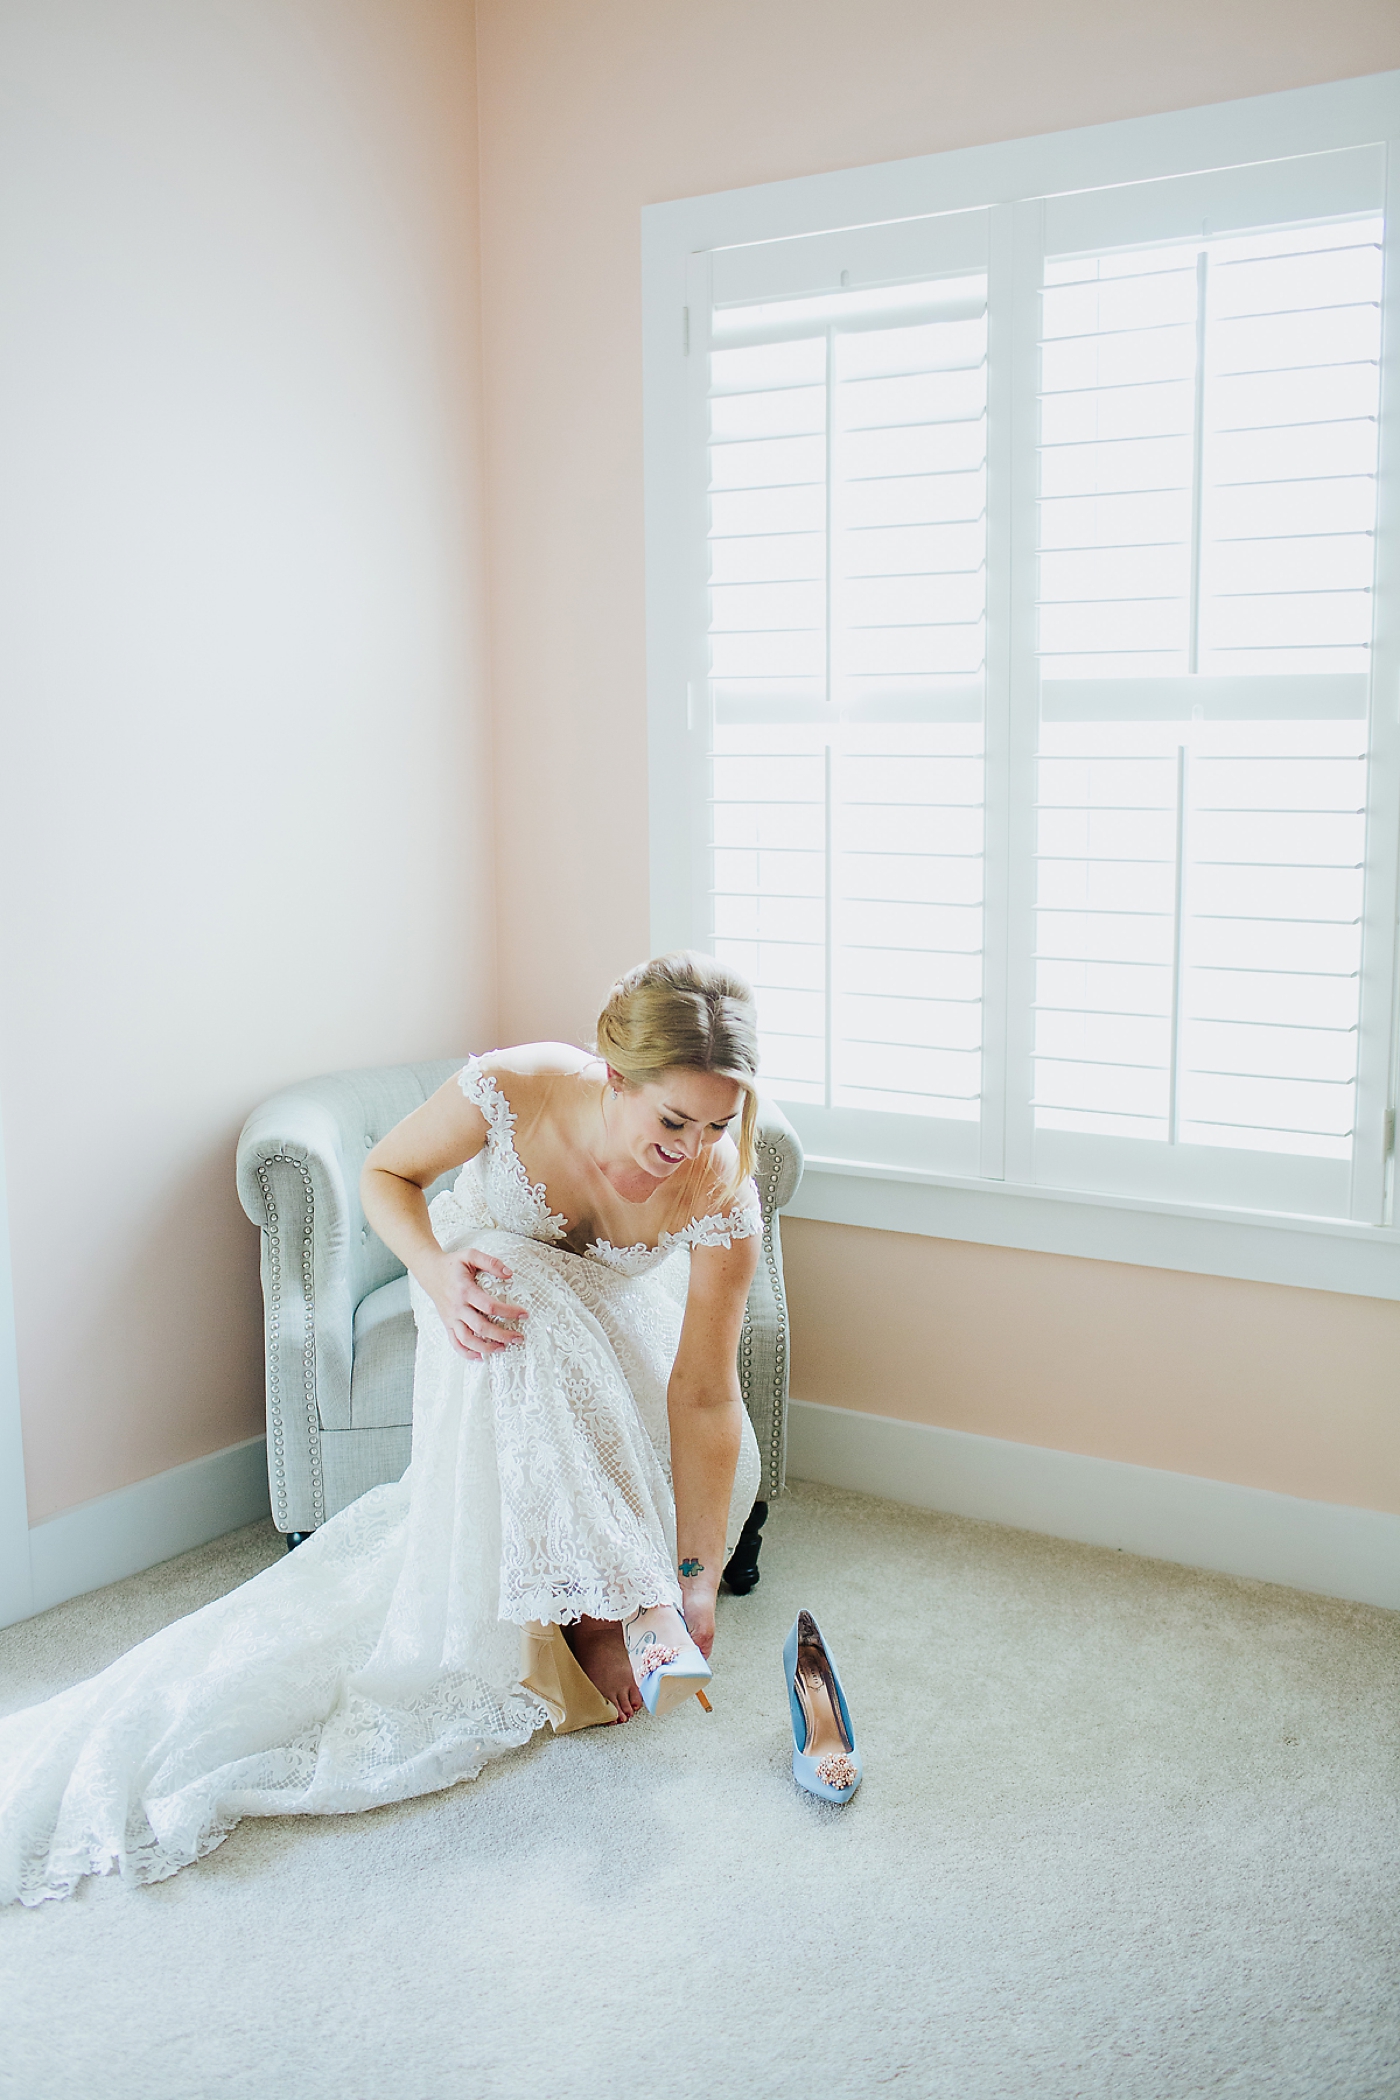 Finding the perfect getting ready location for your wedding - Izzy And Co.